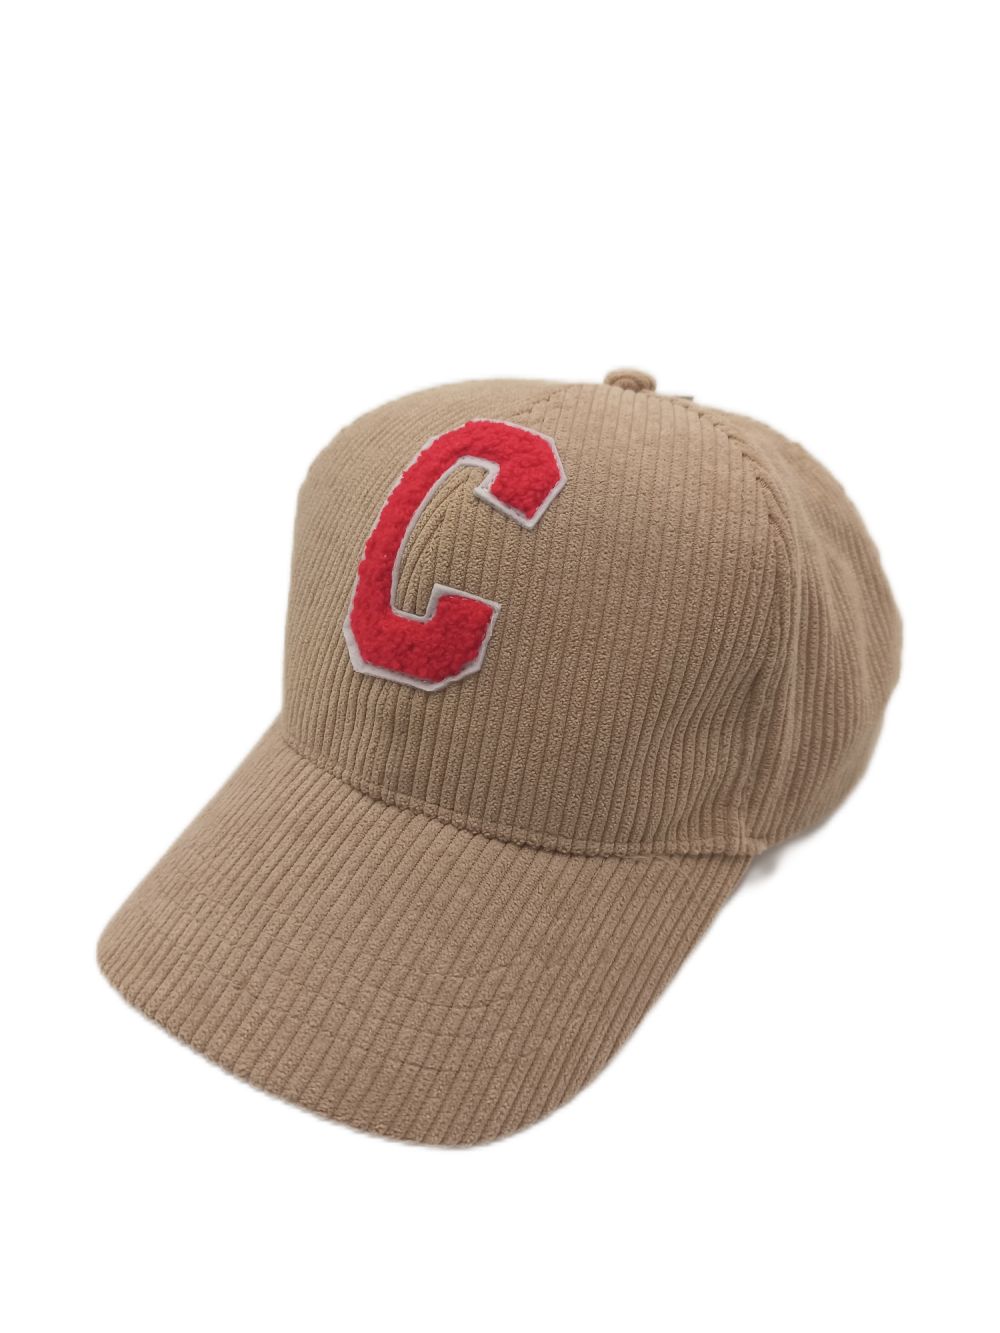 Corduroy patch embroidered genep sapotong cap baseball